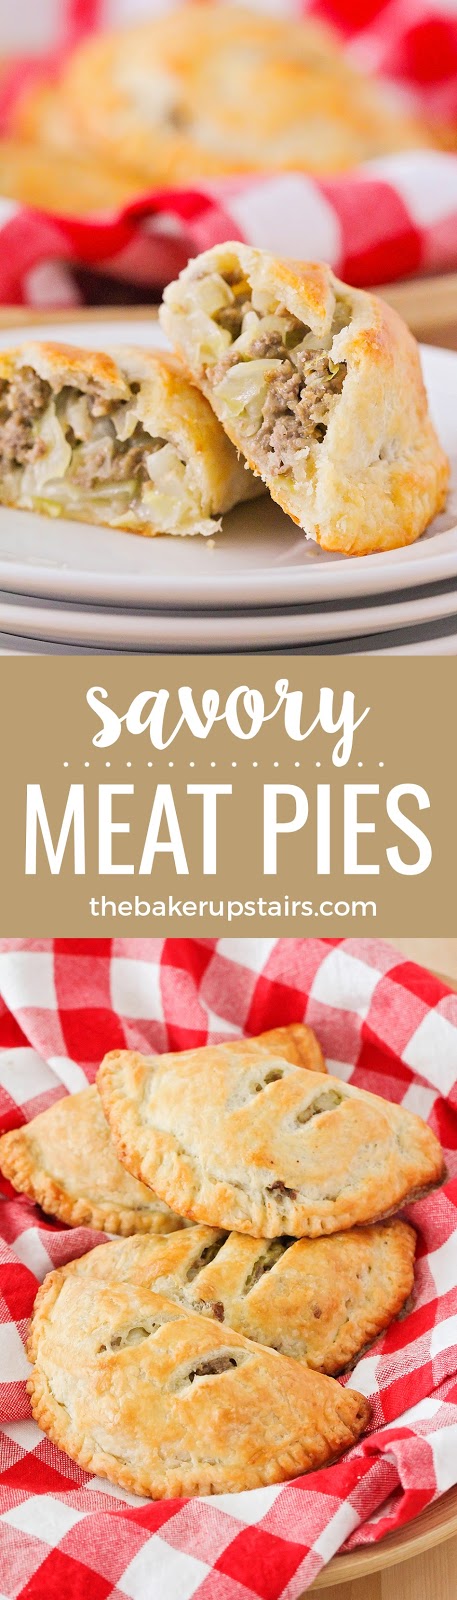 These delicious and savory meat pies are so easy to make, and taste amazing!